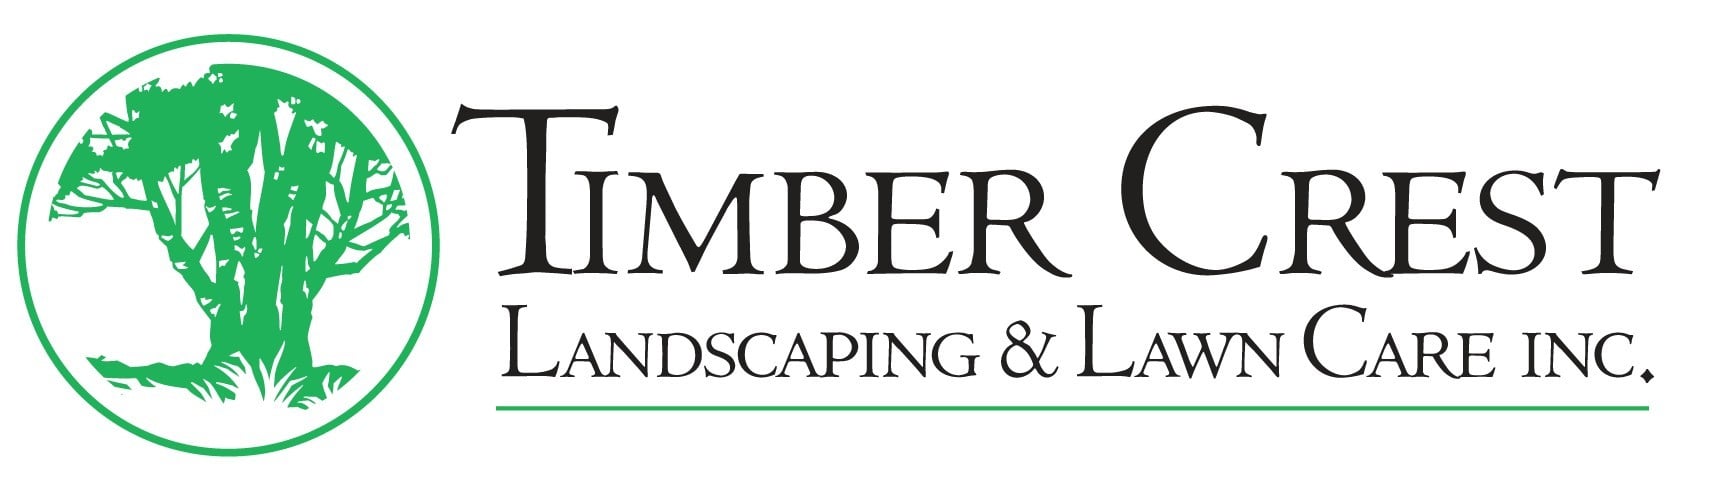 Timber Crest Landscaping and Lawn Care Logo